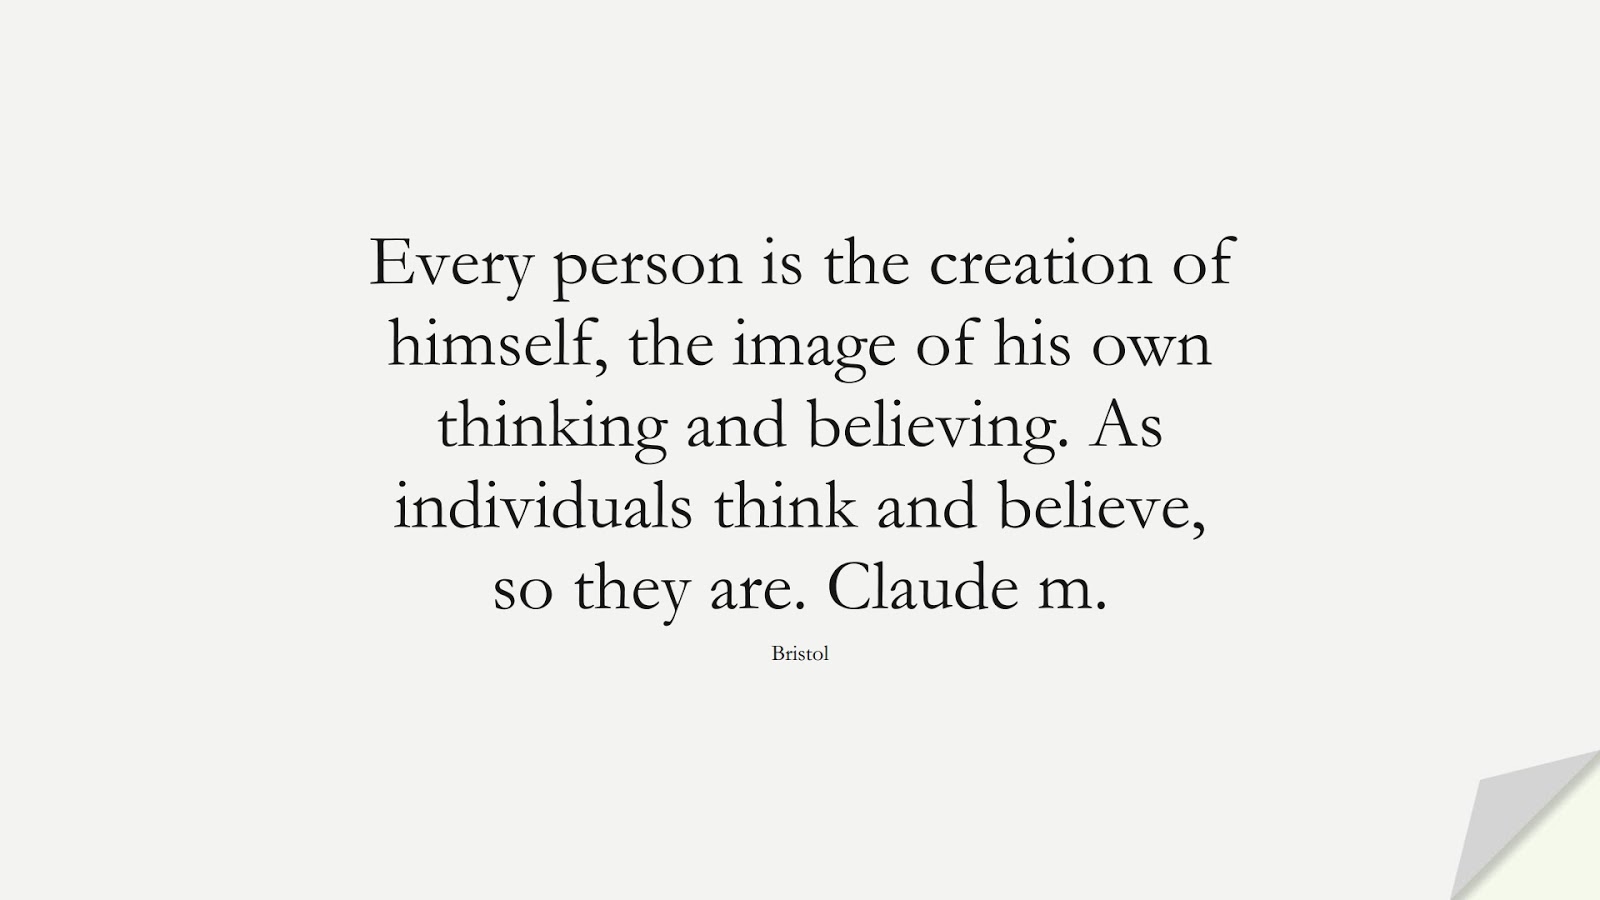 Every person is the creation of himself, the image of his own thinking and believing. As individuals think and believe, so they are. Claude m. (Bristol);  #SelfEsteemQuotes